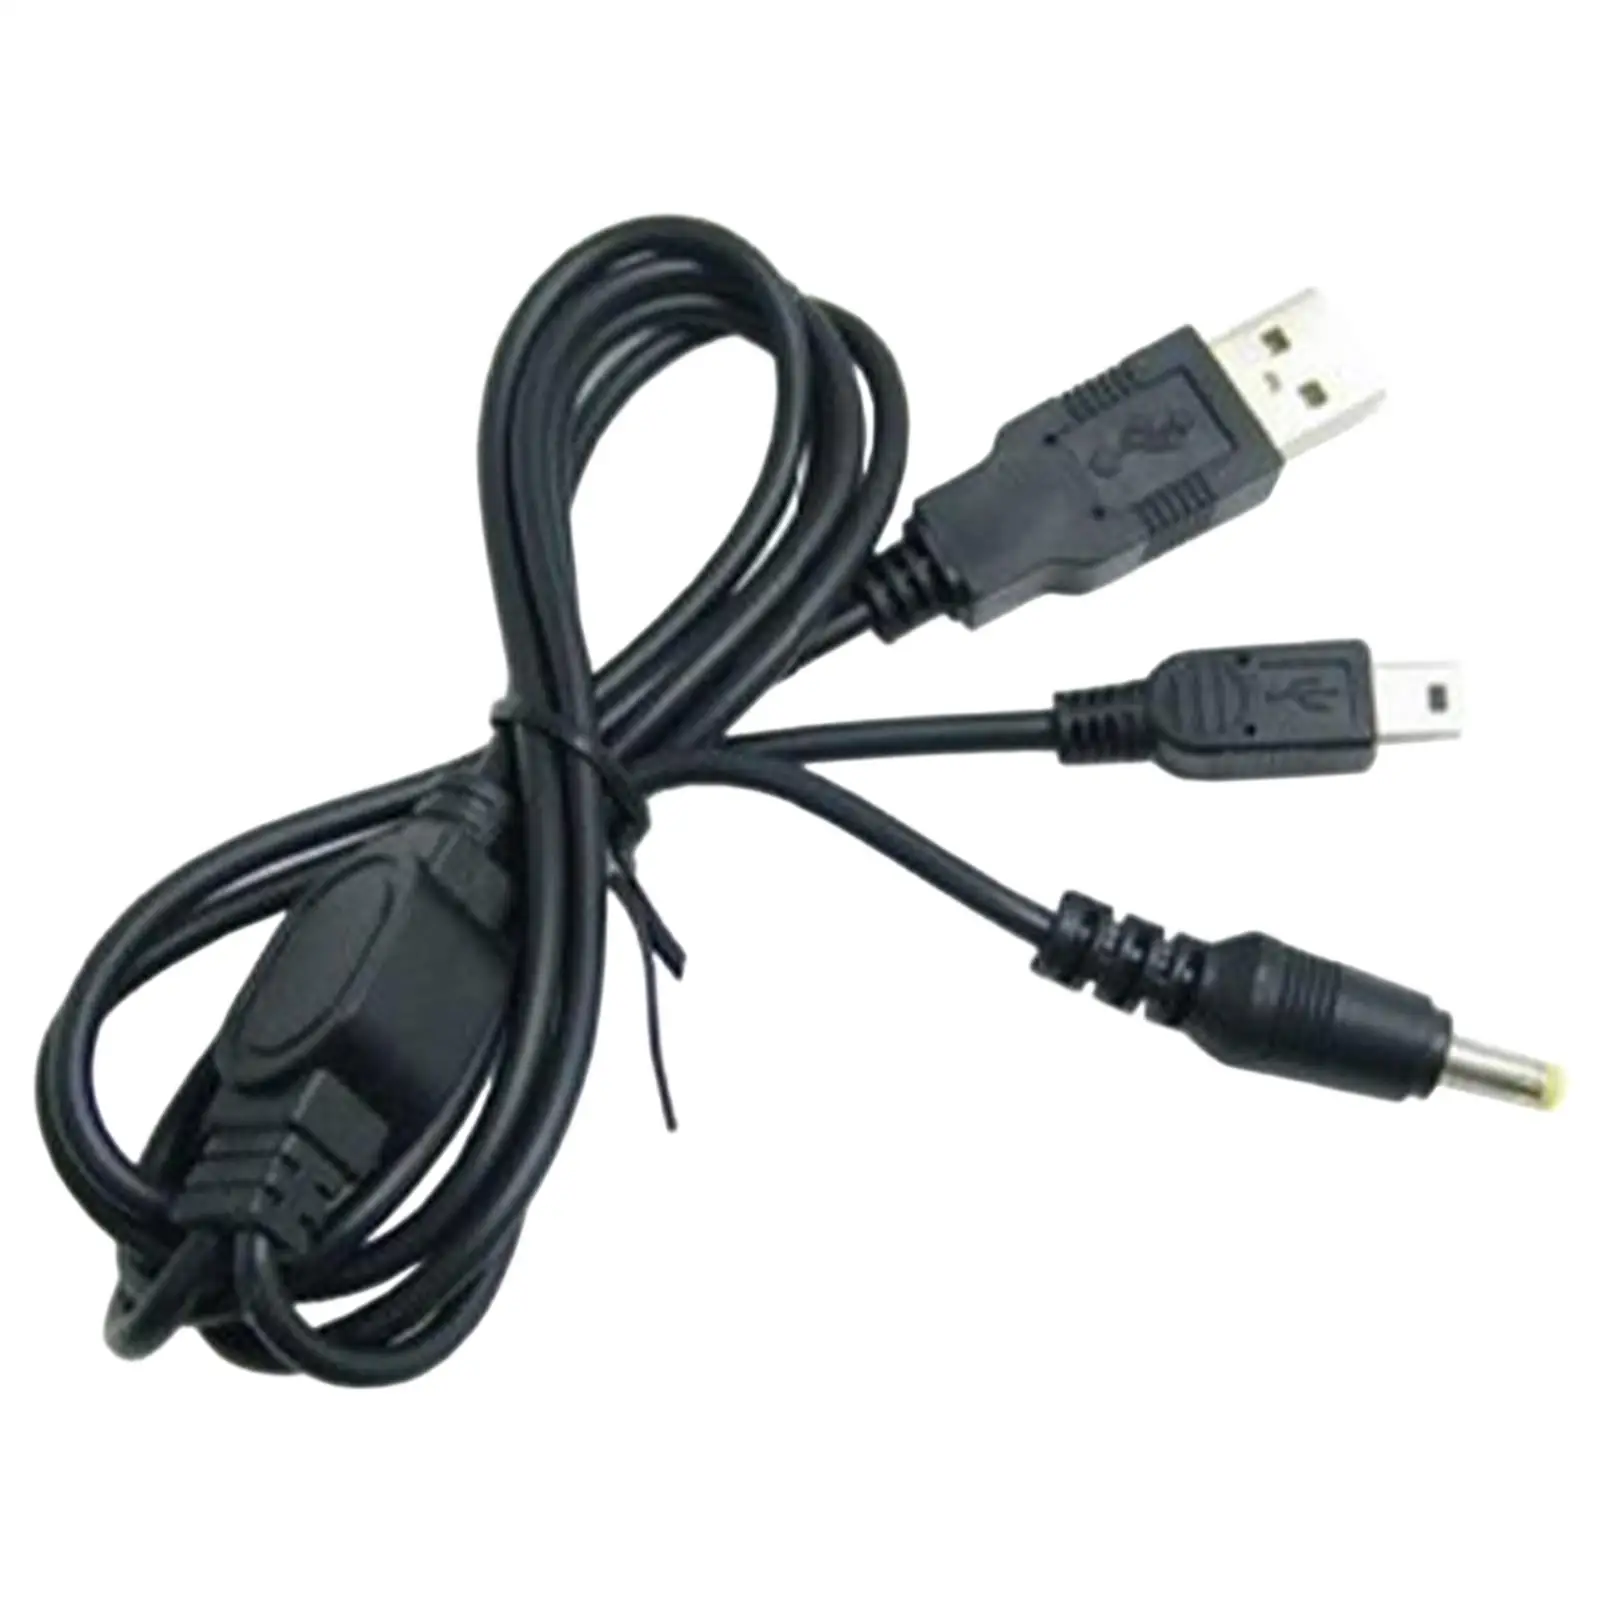 2 in 1 USB Charging Cable High Speed Data Line Replacement for Sony Psp 1000 2000 3000 Series Black Games Portable Power Cord